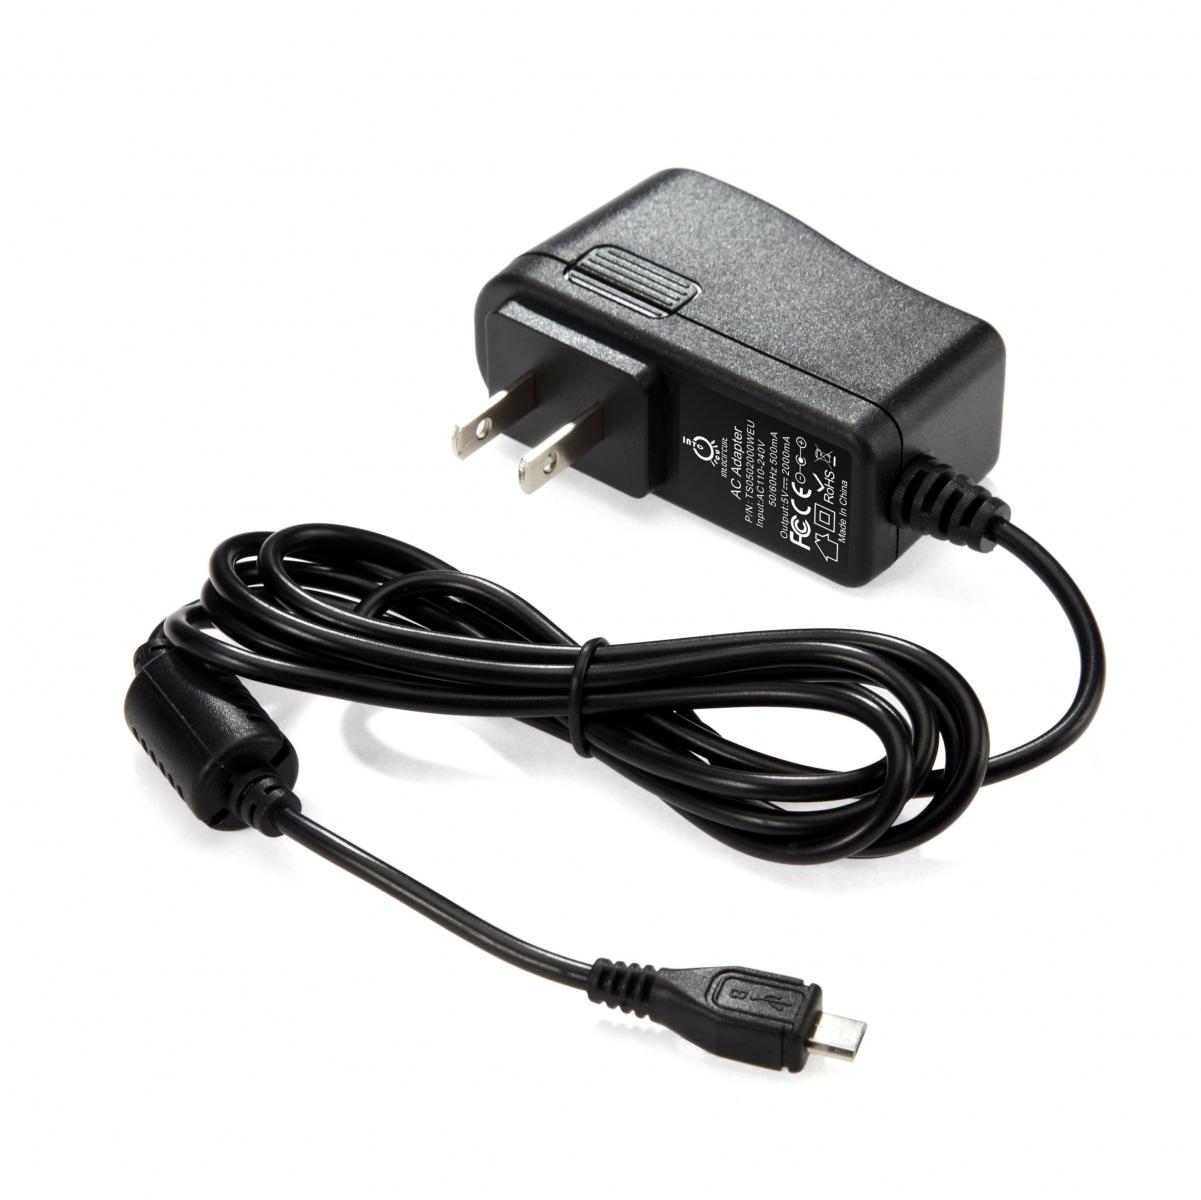 Compatible Designed Charger for Amazon Kindle Fire.